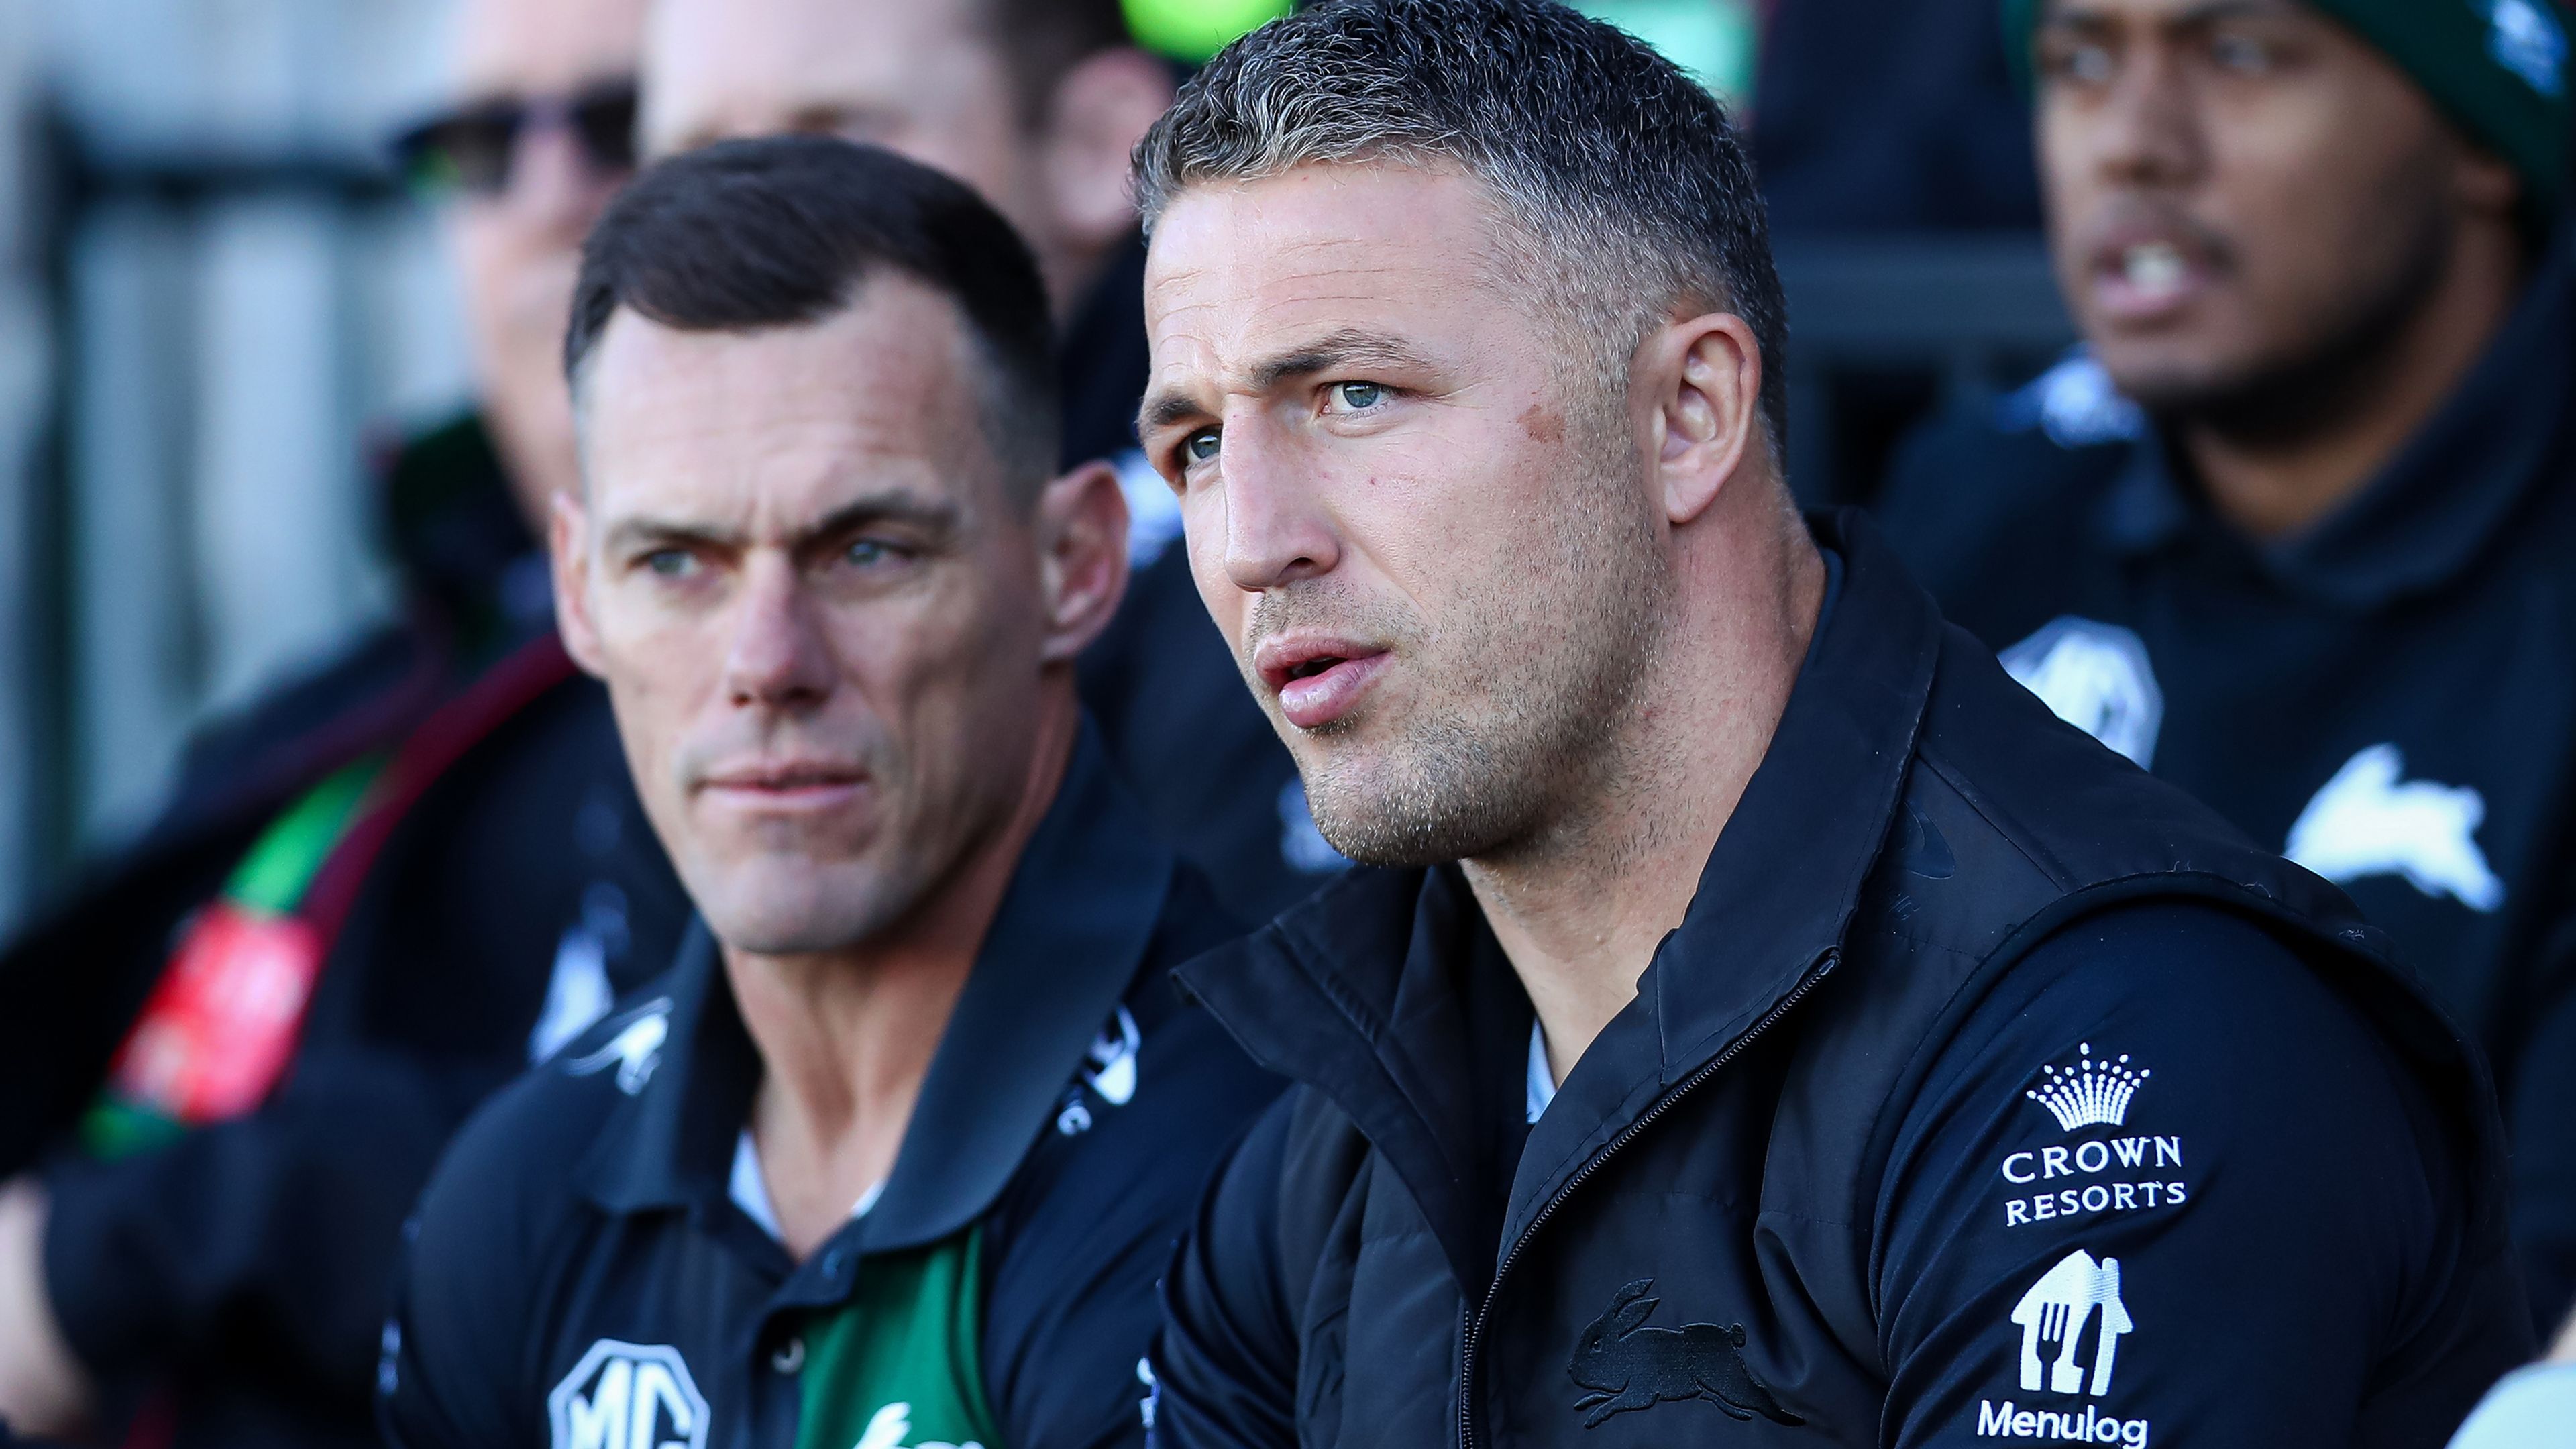 South Sydney legend Sam Burgess lands first rugby league head coaching role